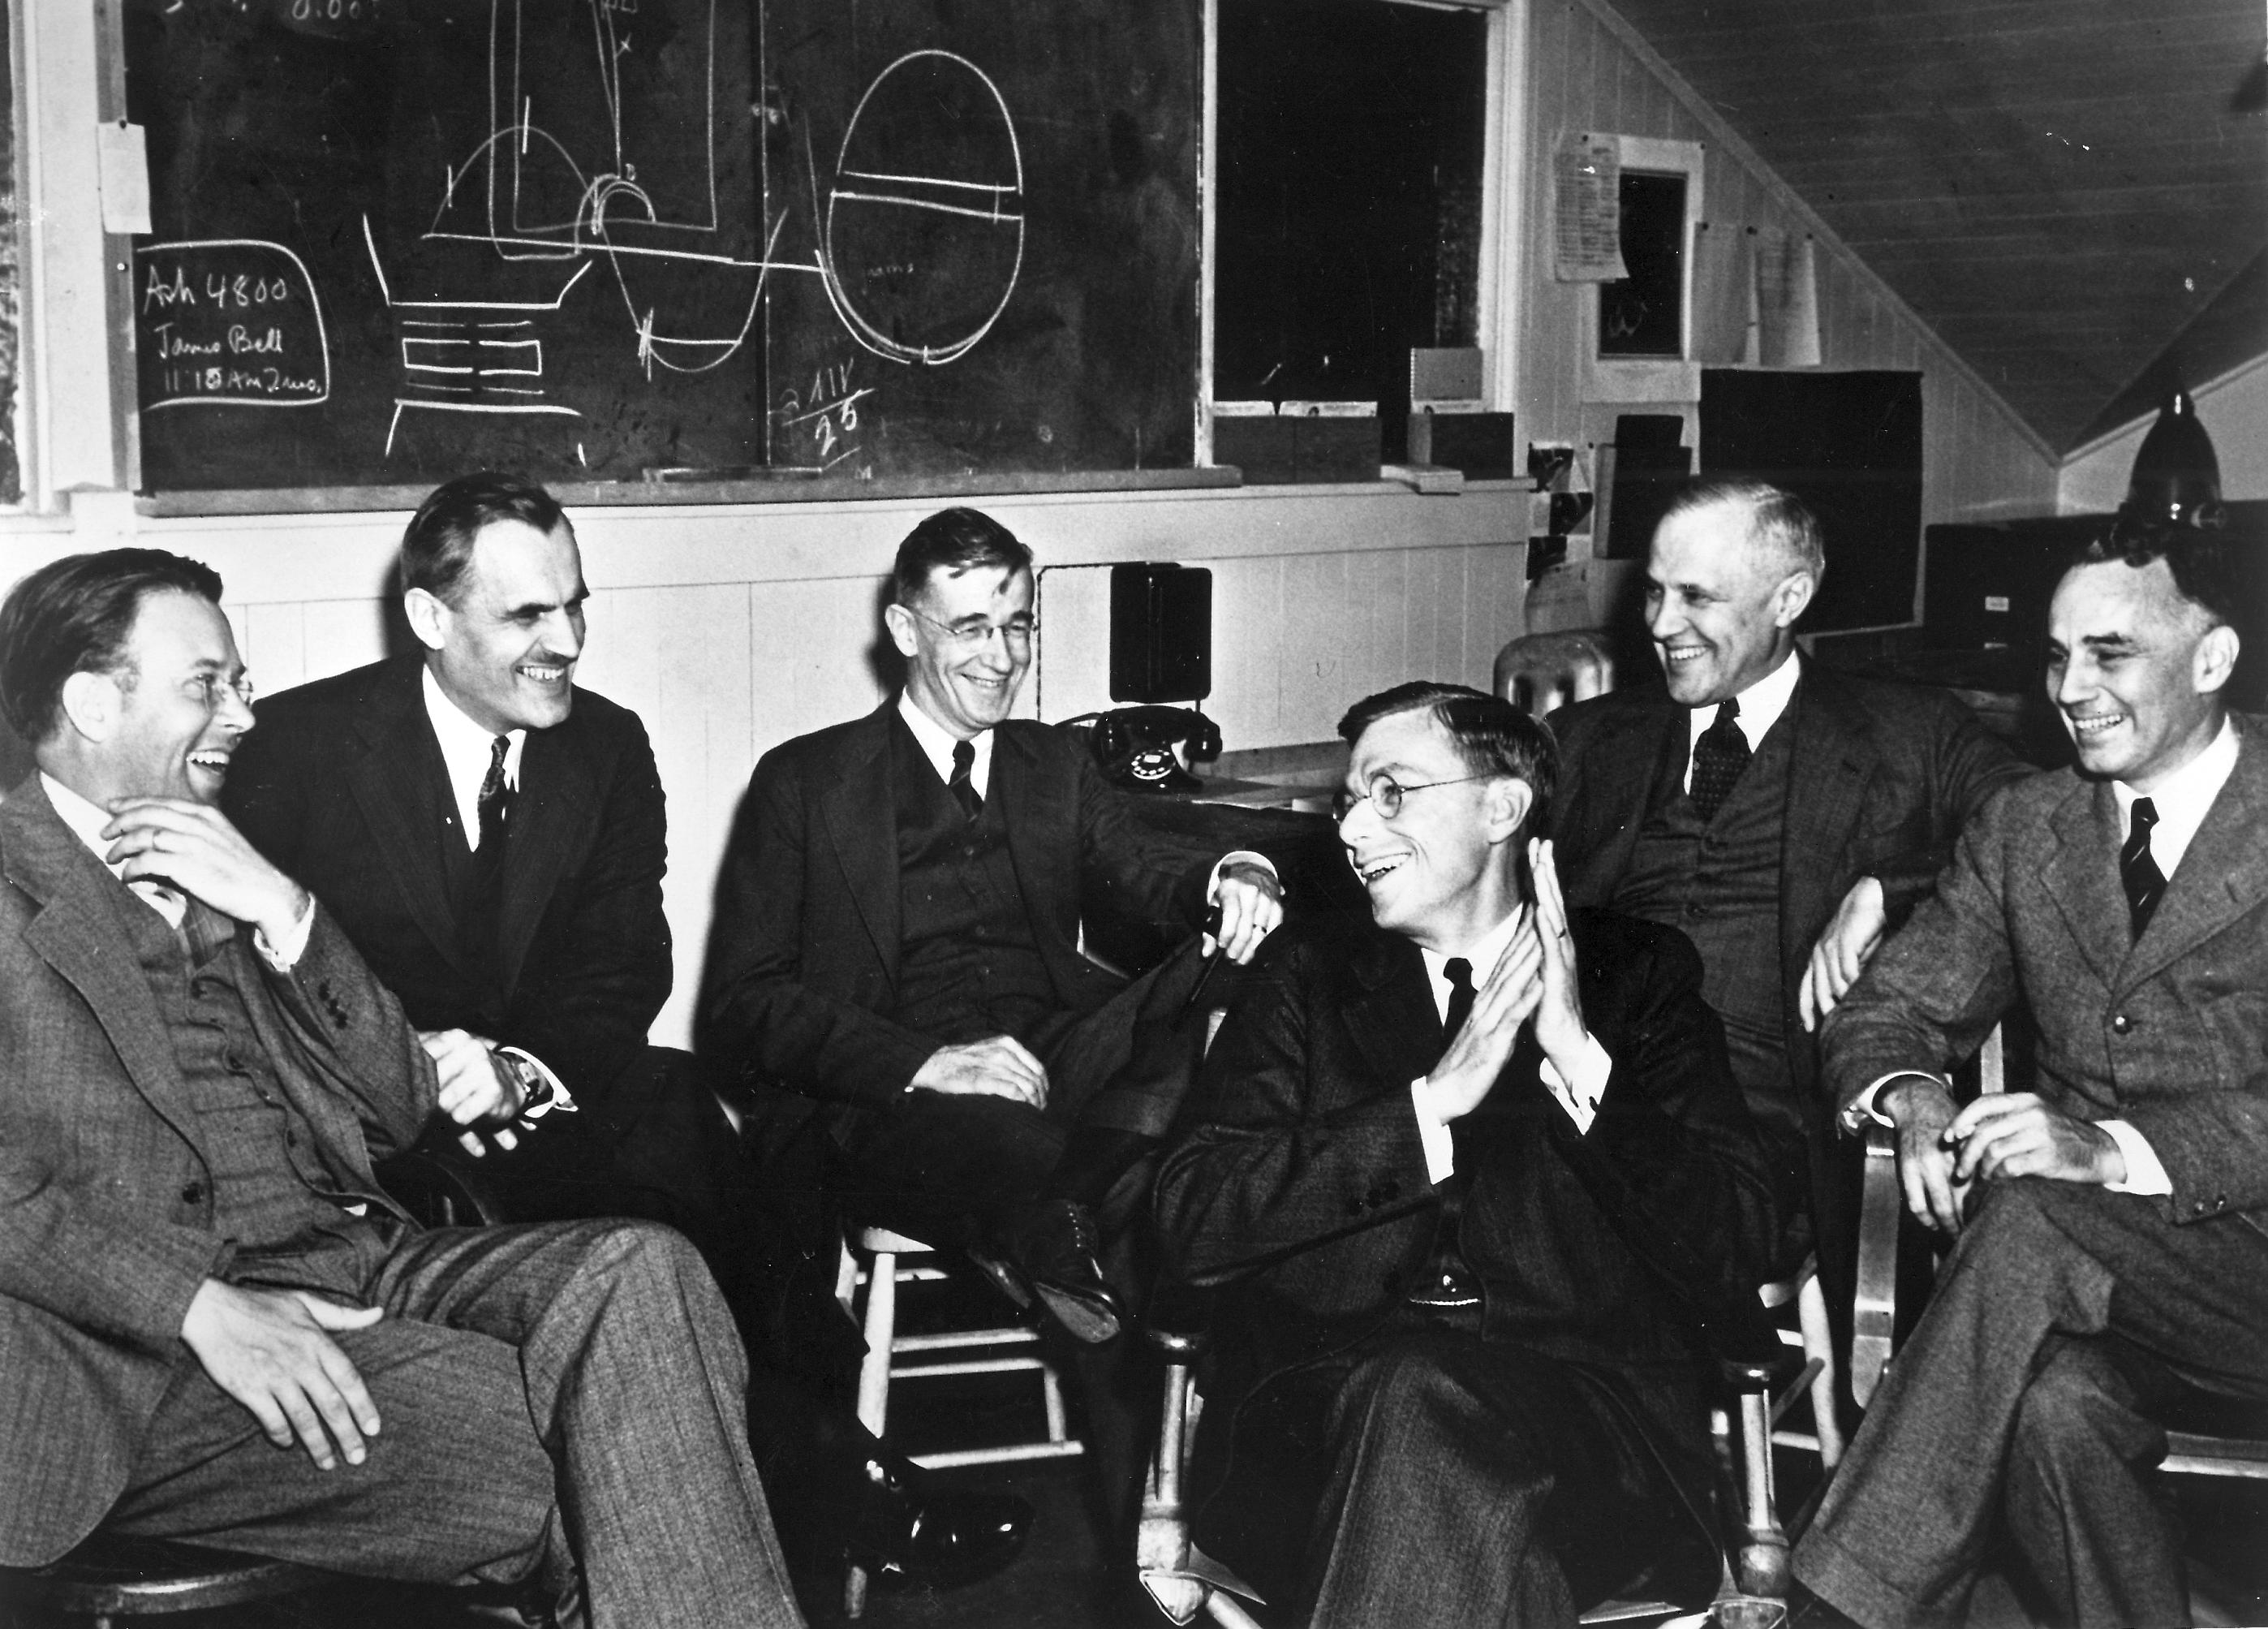 Scientists of the S-1 project (Manhattan Committee) sharing a lighter moment as they discuss the feasibility of the 184-inch cyclotron at Berkeley, California, United States, 29 Mar 1940.